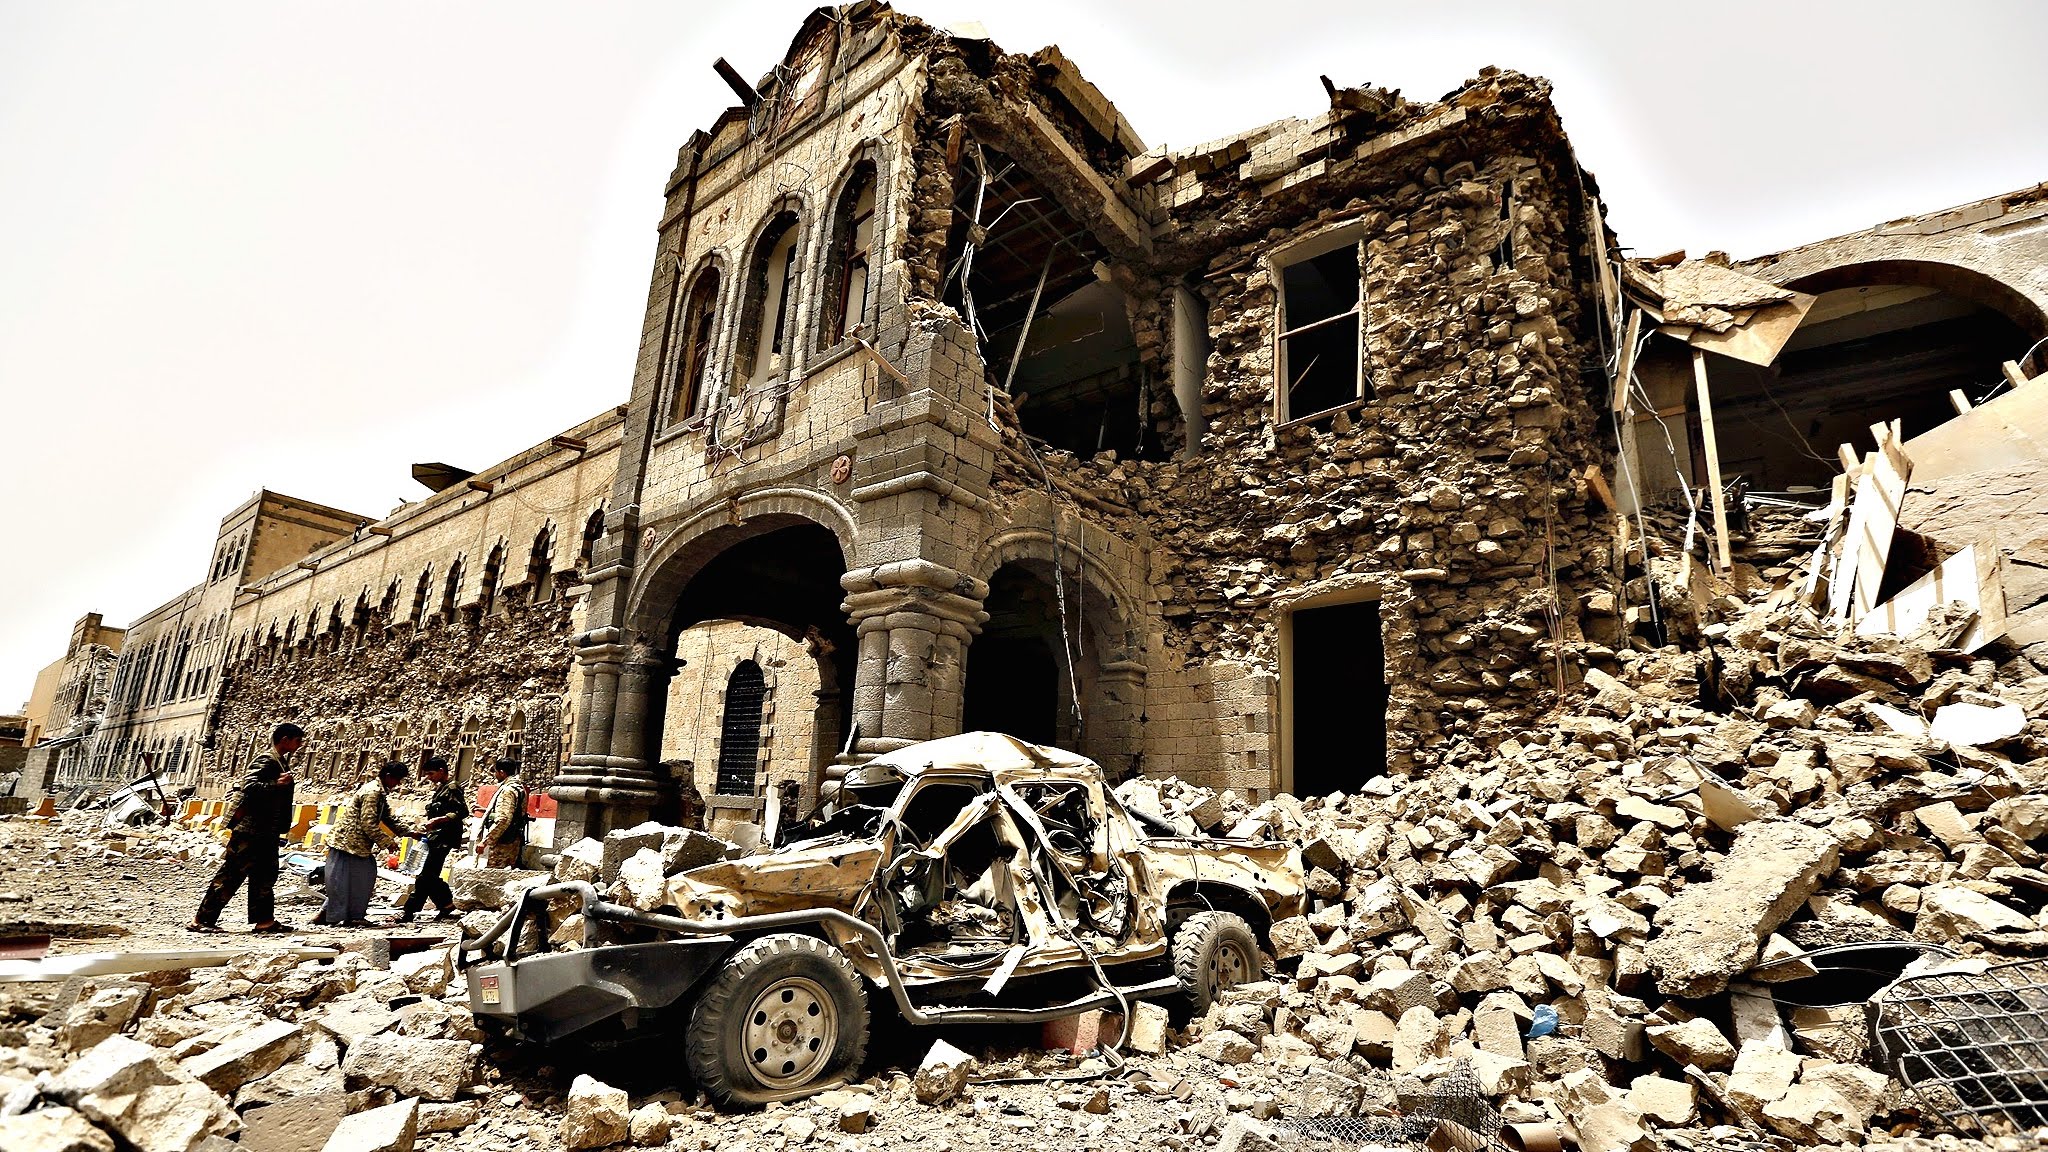 Destruction of the old city of Sana'a, a UNESCO World Heritage Site, by a Saudi bombing campaign in Sana'a, Yemen, June 12, 2015. EuroNews | Screenshot